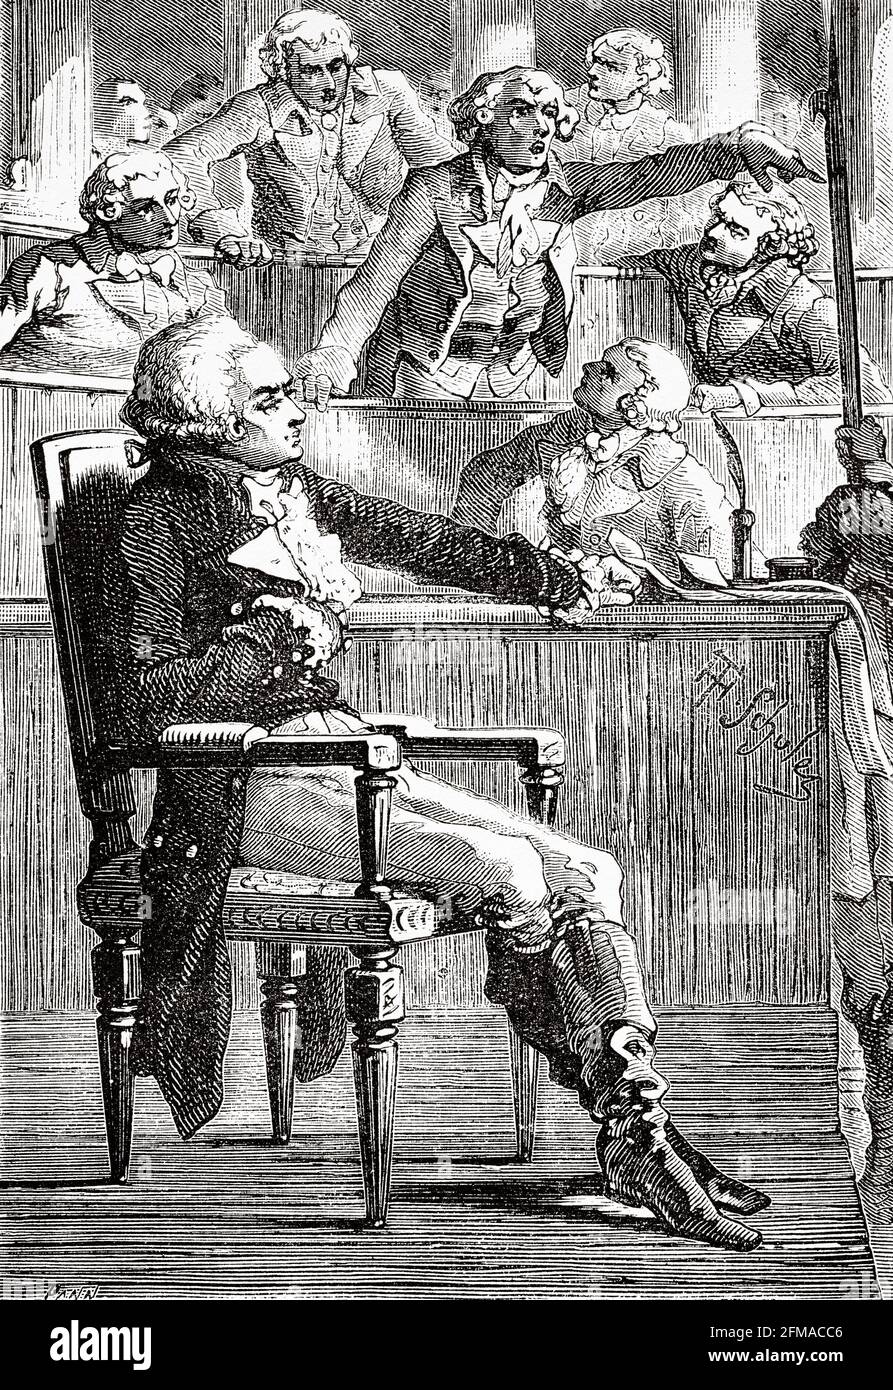 Maximilien Robespierre (1758-1794) Jacobin leader during French Revolution. France. Old 19th century engraved illustration from Histoire de la Revolution Francaise 1876 by Jules Michelet (1798-1874) Stock Photo